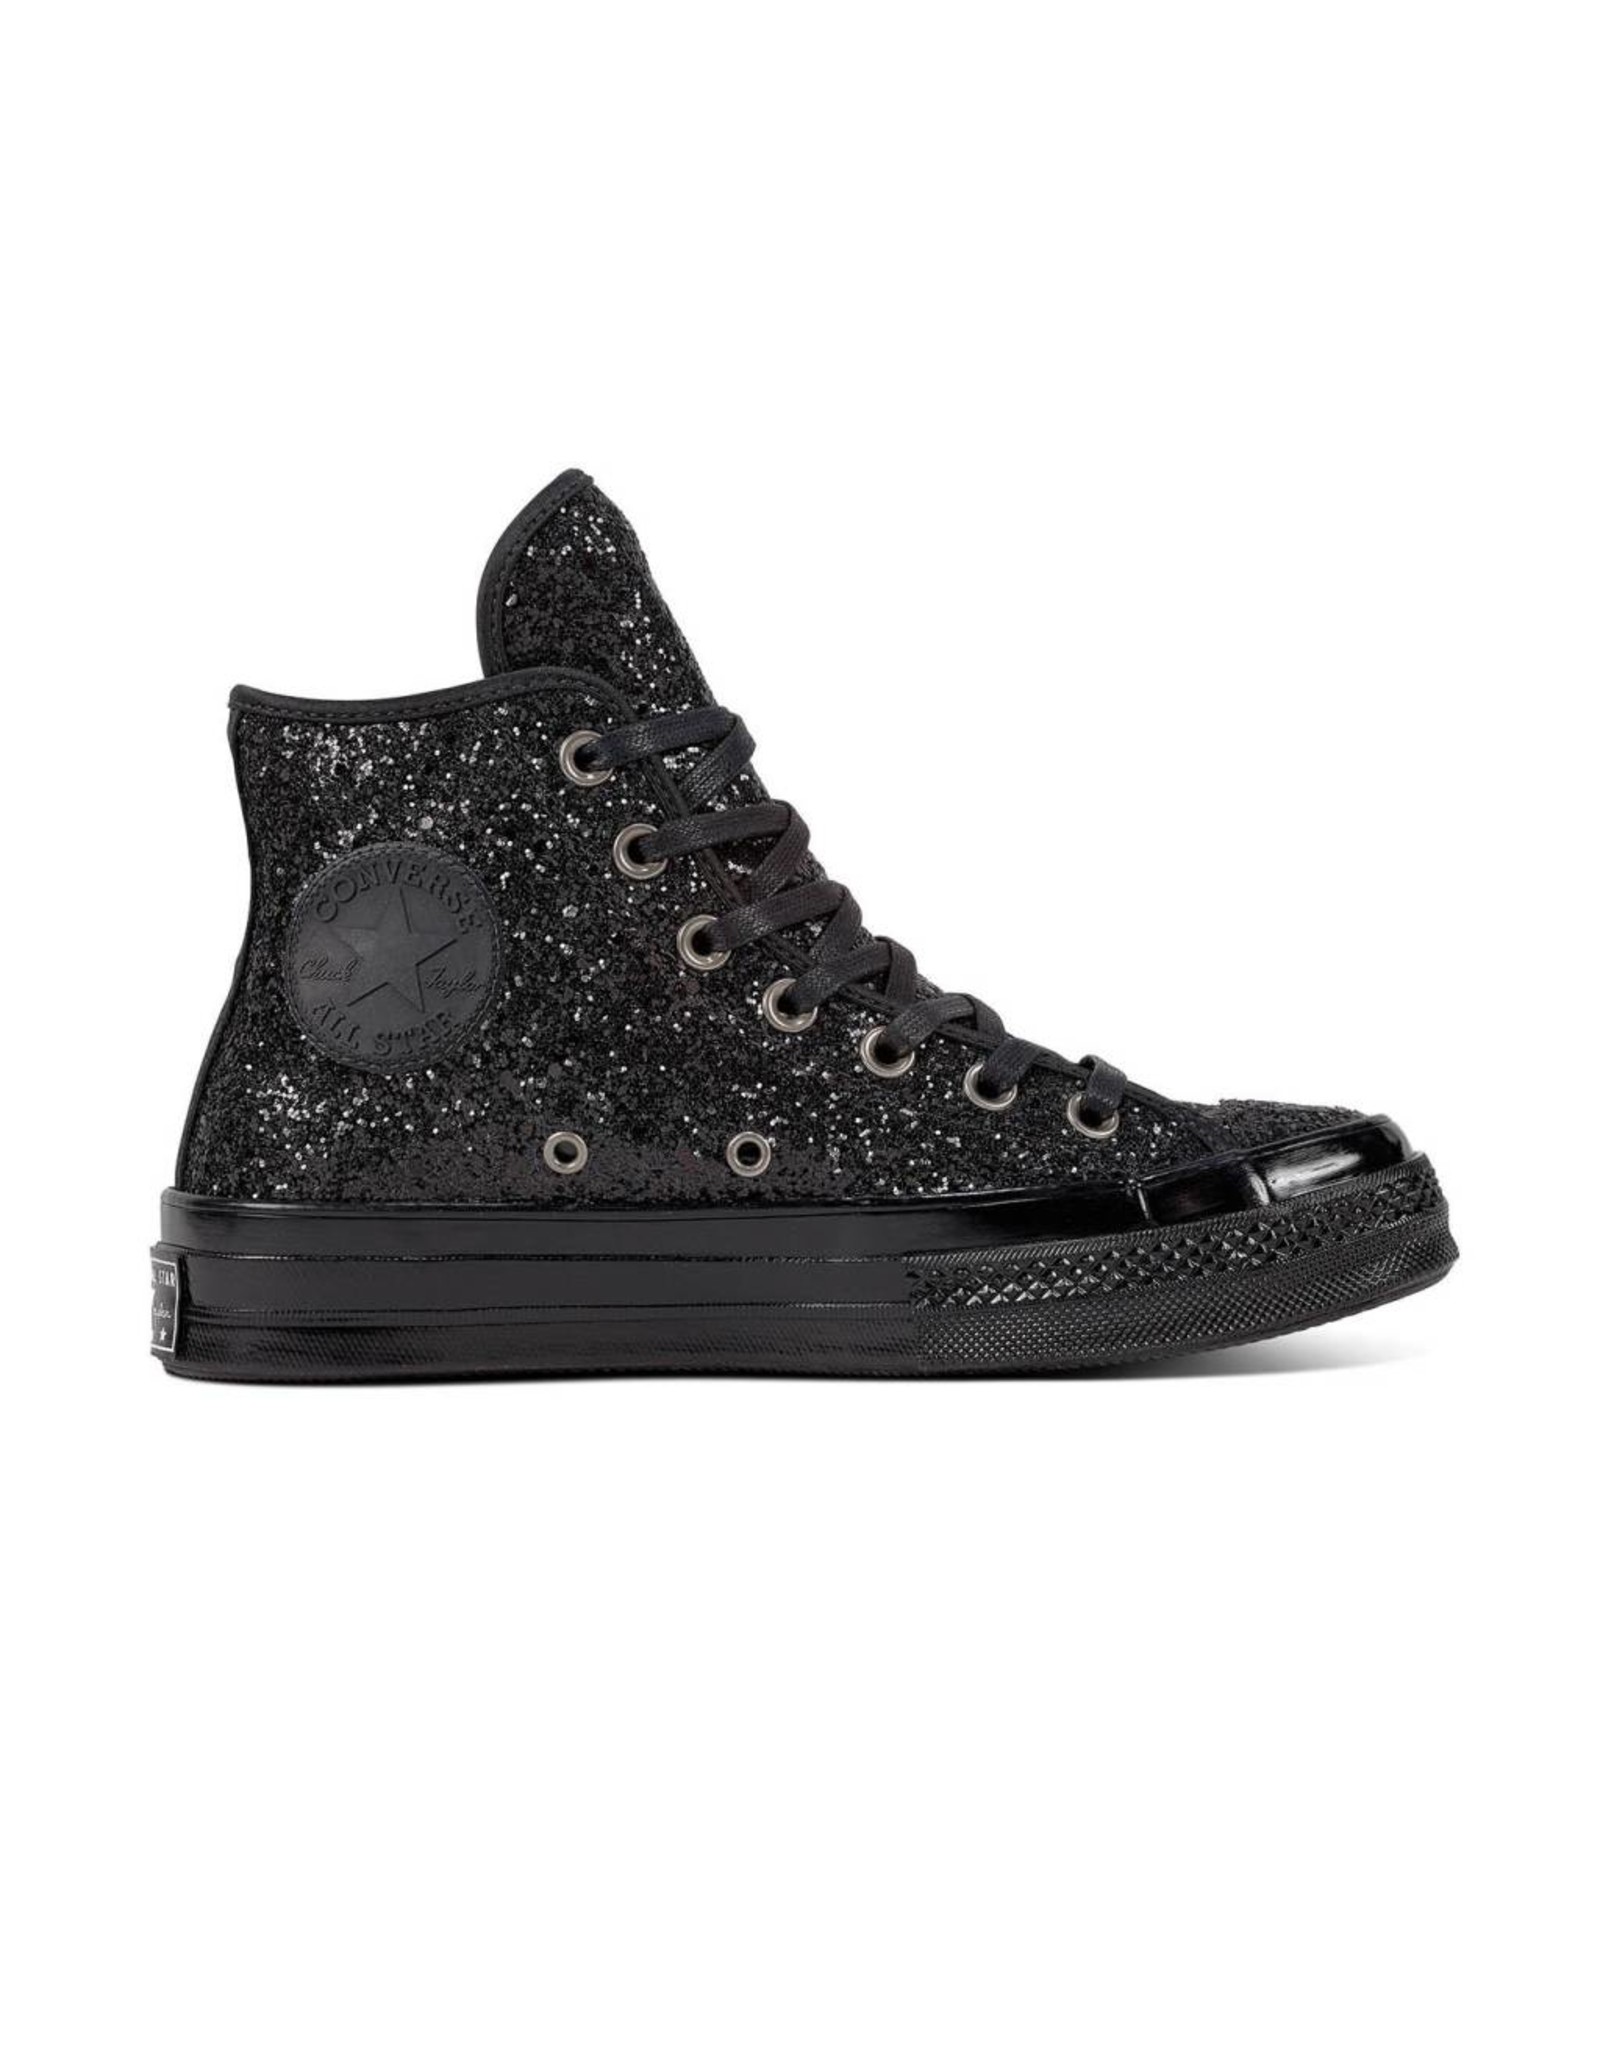 RIO X20 Montreal Converse Chuck Taylor All Star Boots4all - Boutique X20 MTL